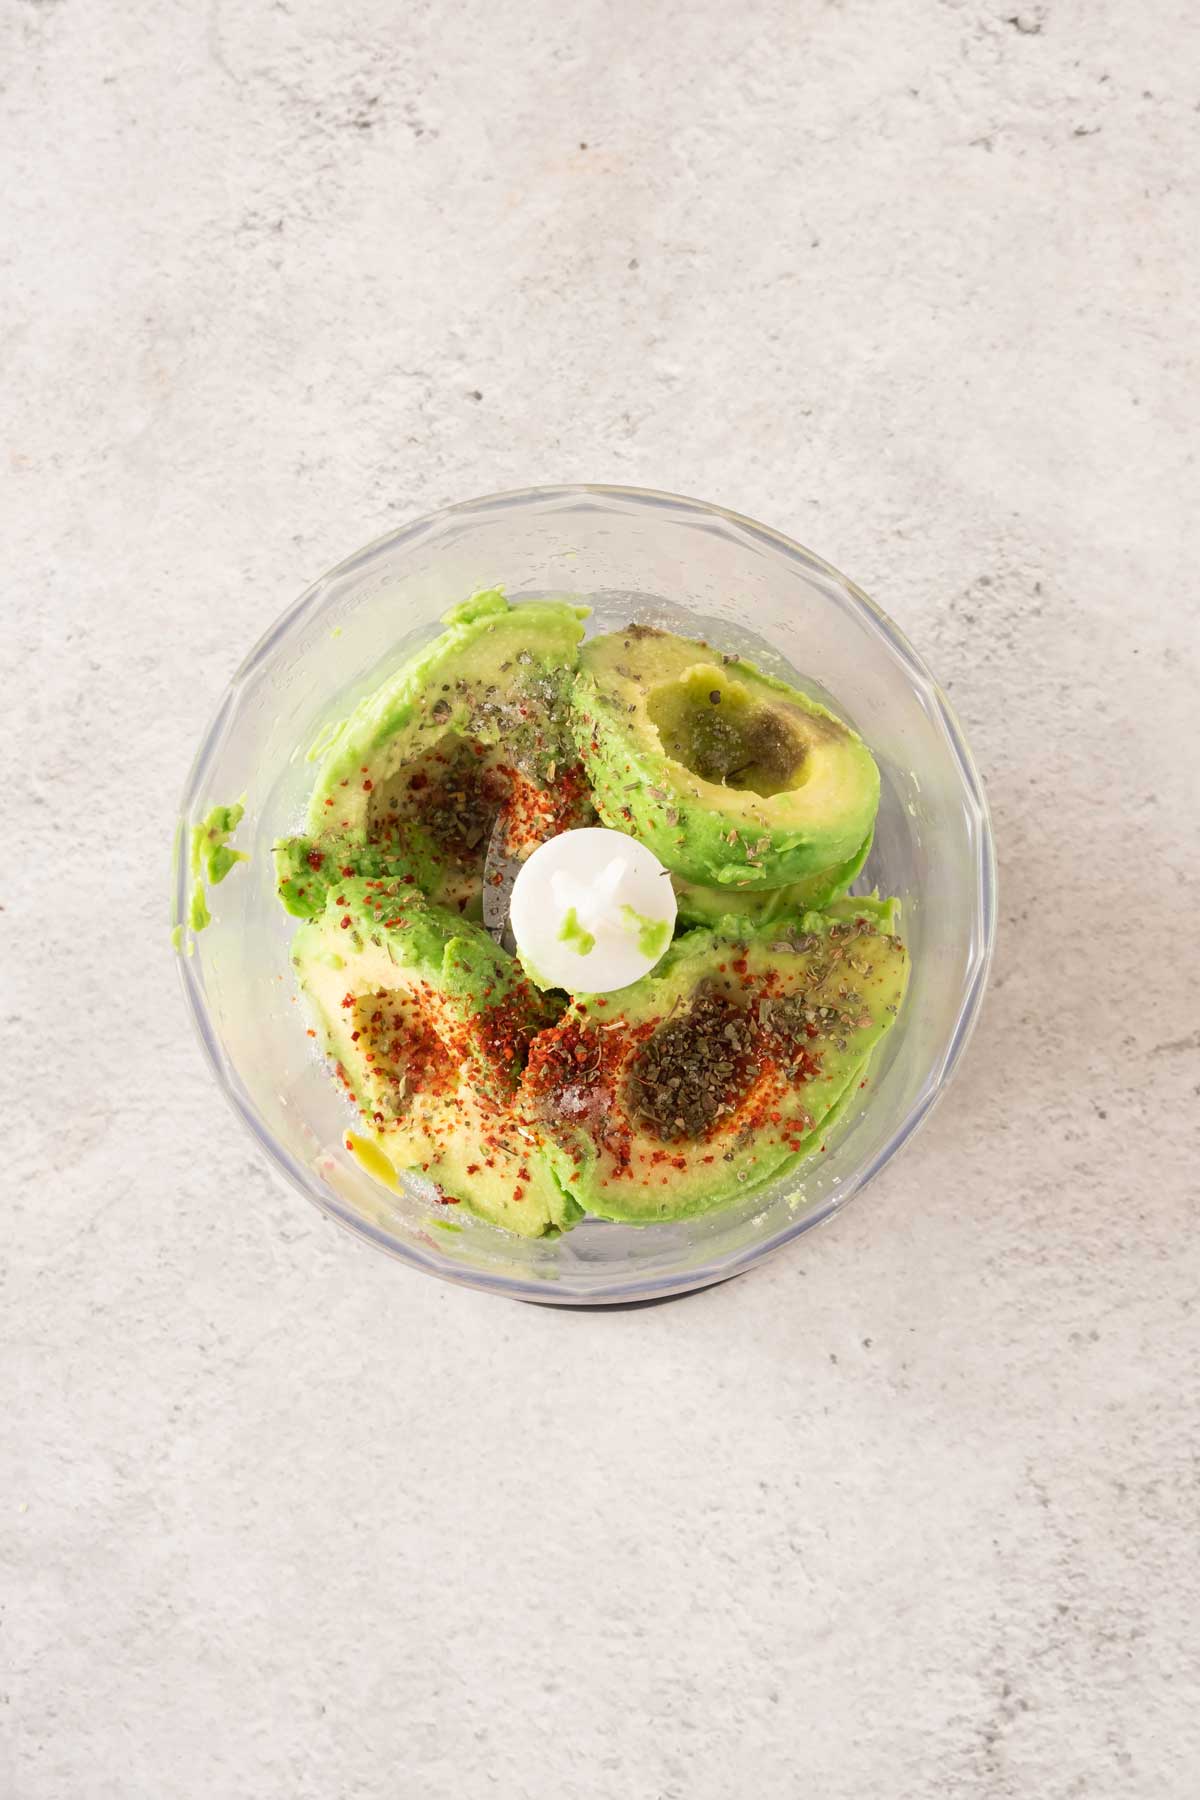 Avocado in a food processor with spices.